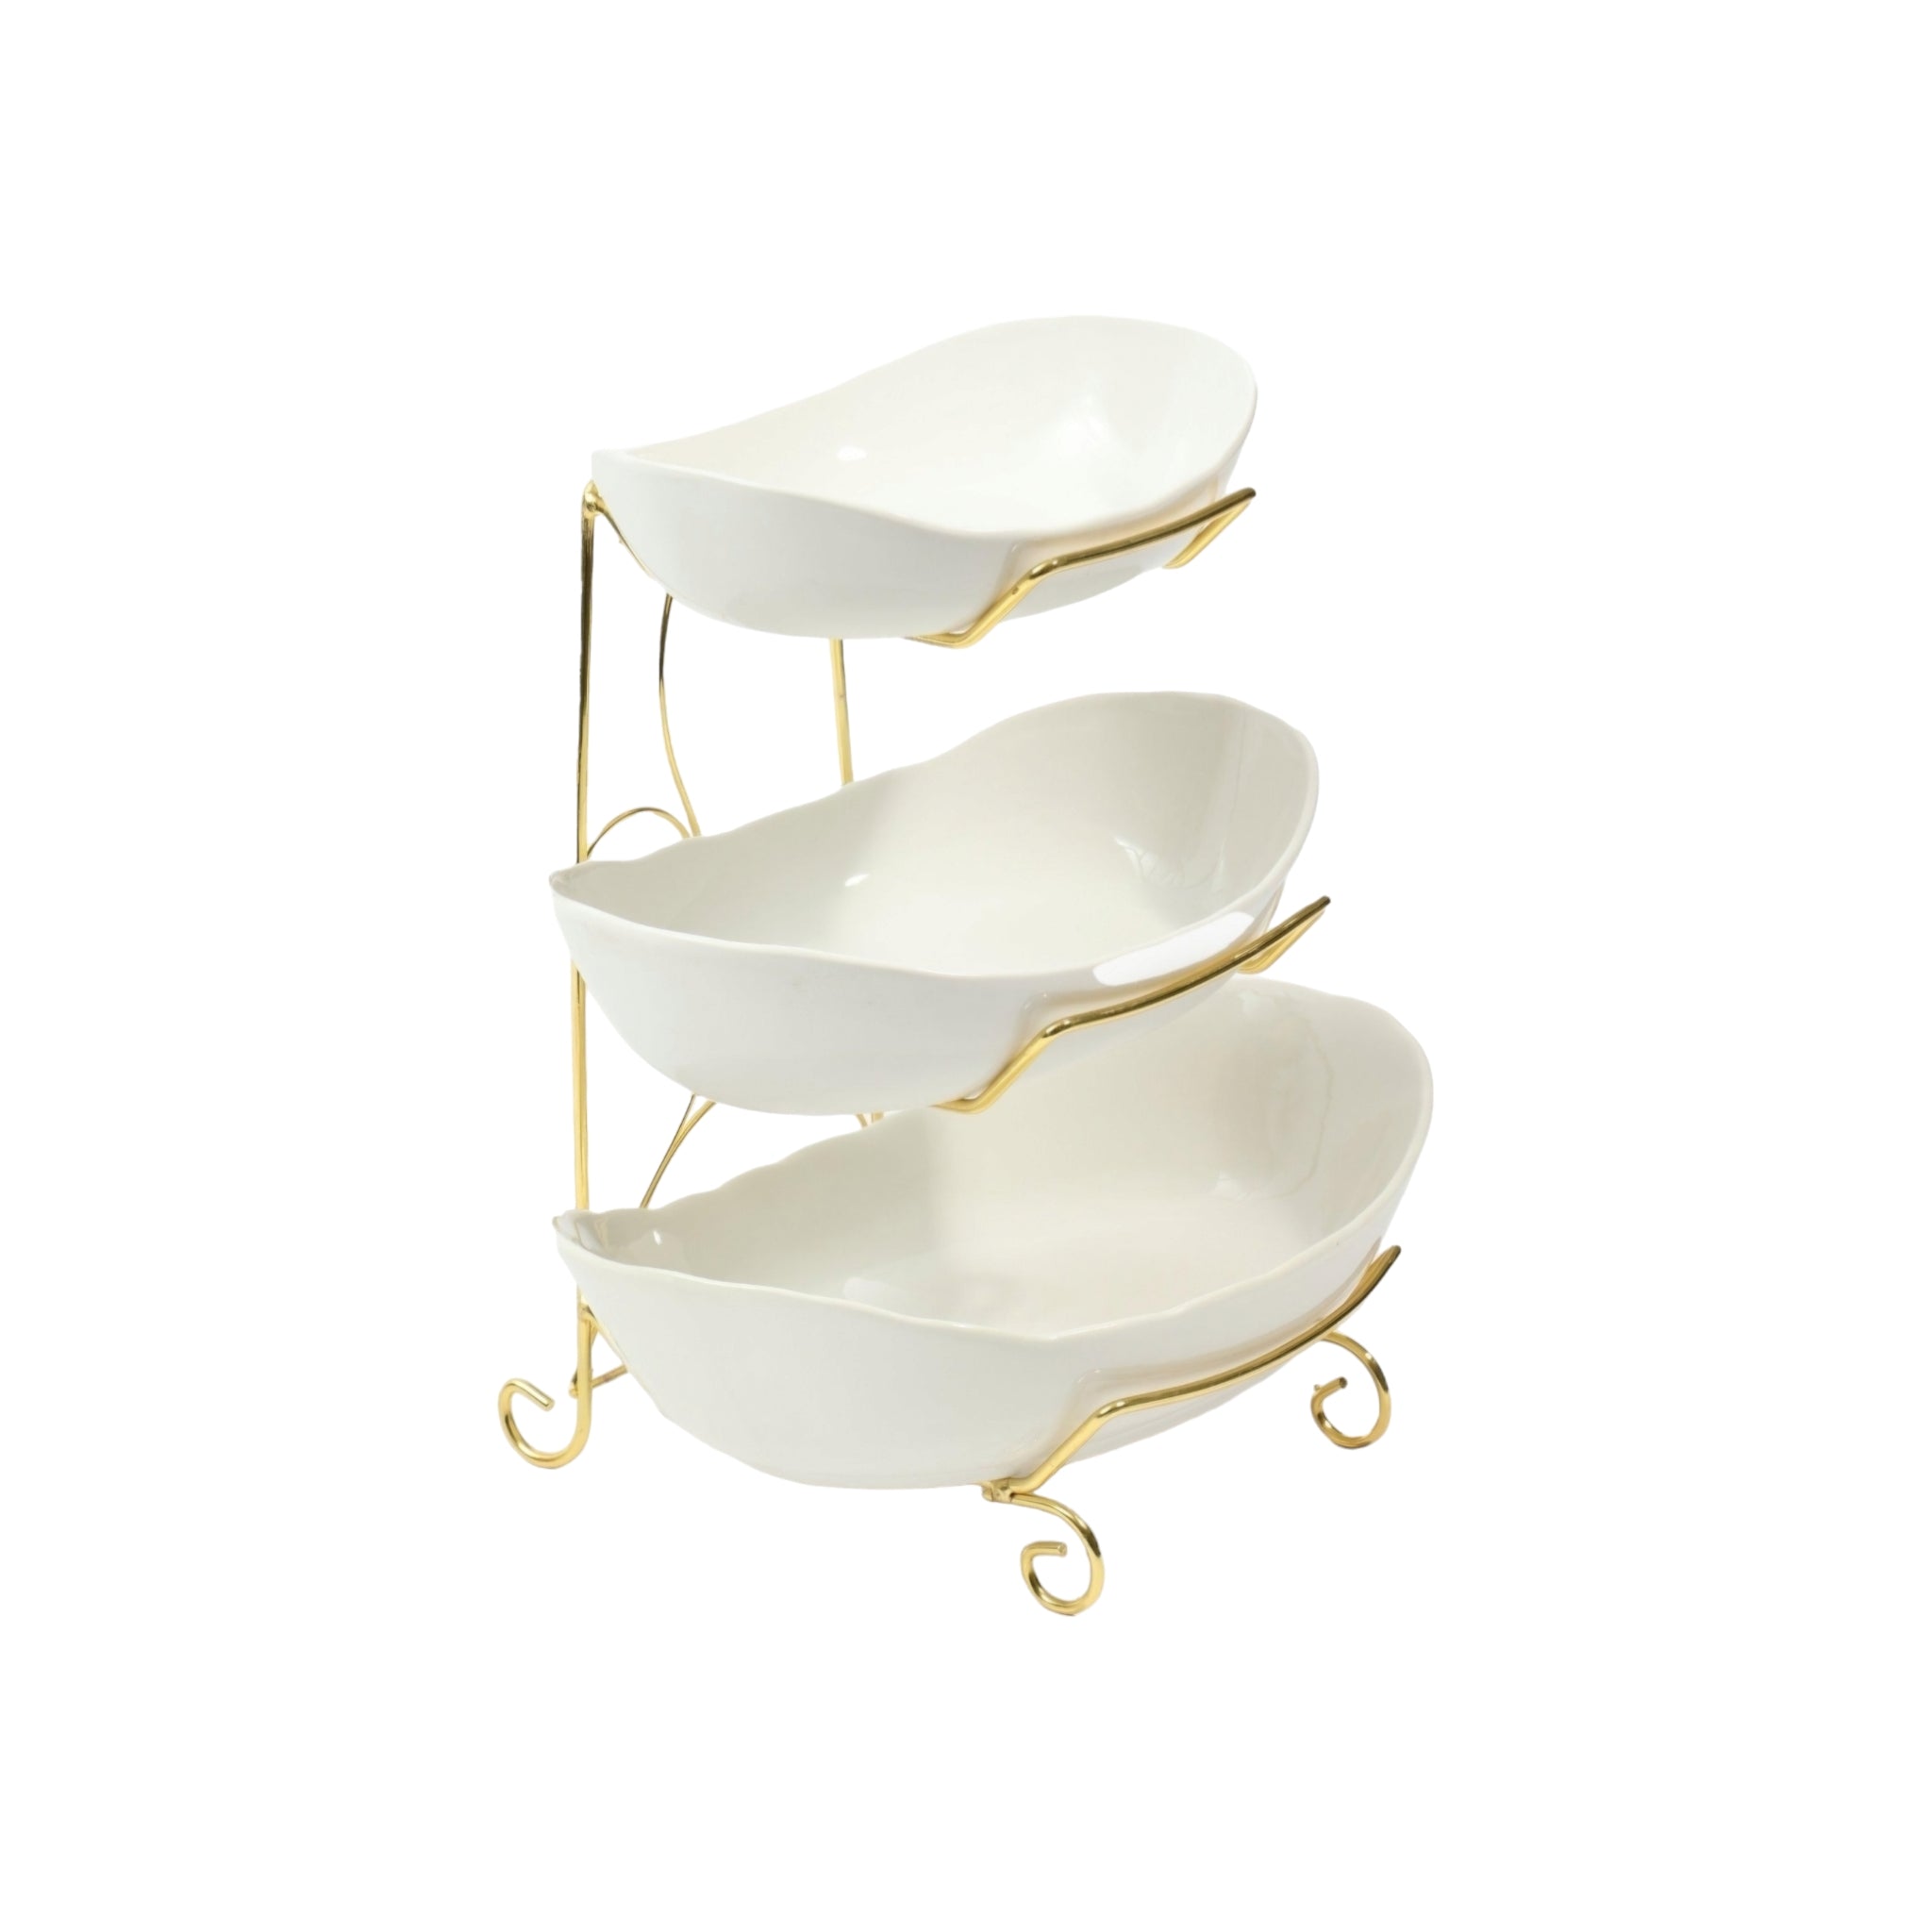 3-Tier Oval Bowl on Stand